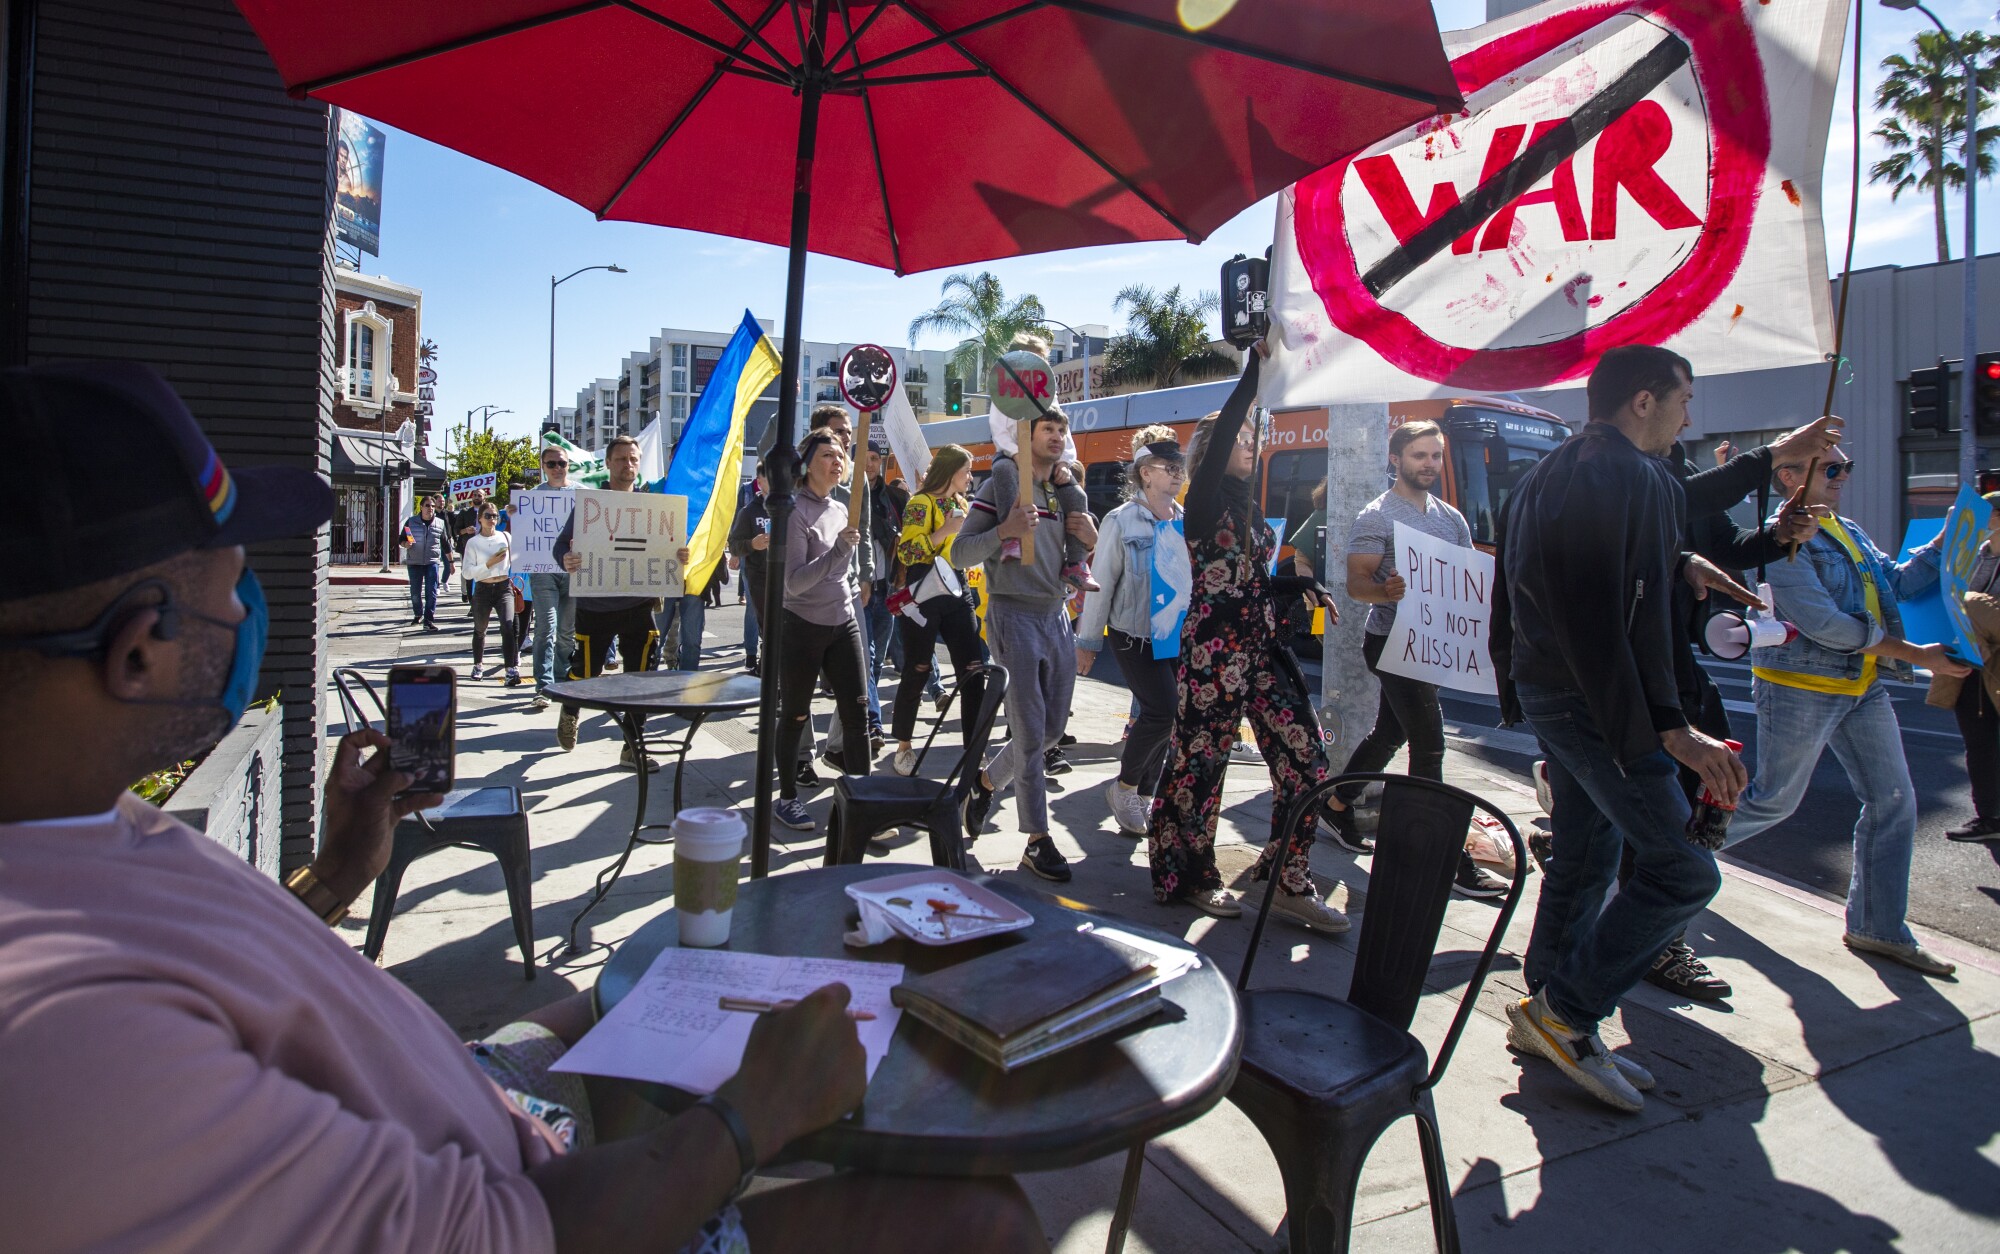 Hundreds of Ukrainian Americans and Ukraine supporters gather to denounce the Russian invasion in Westwood on February 26.